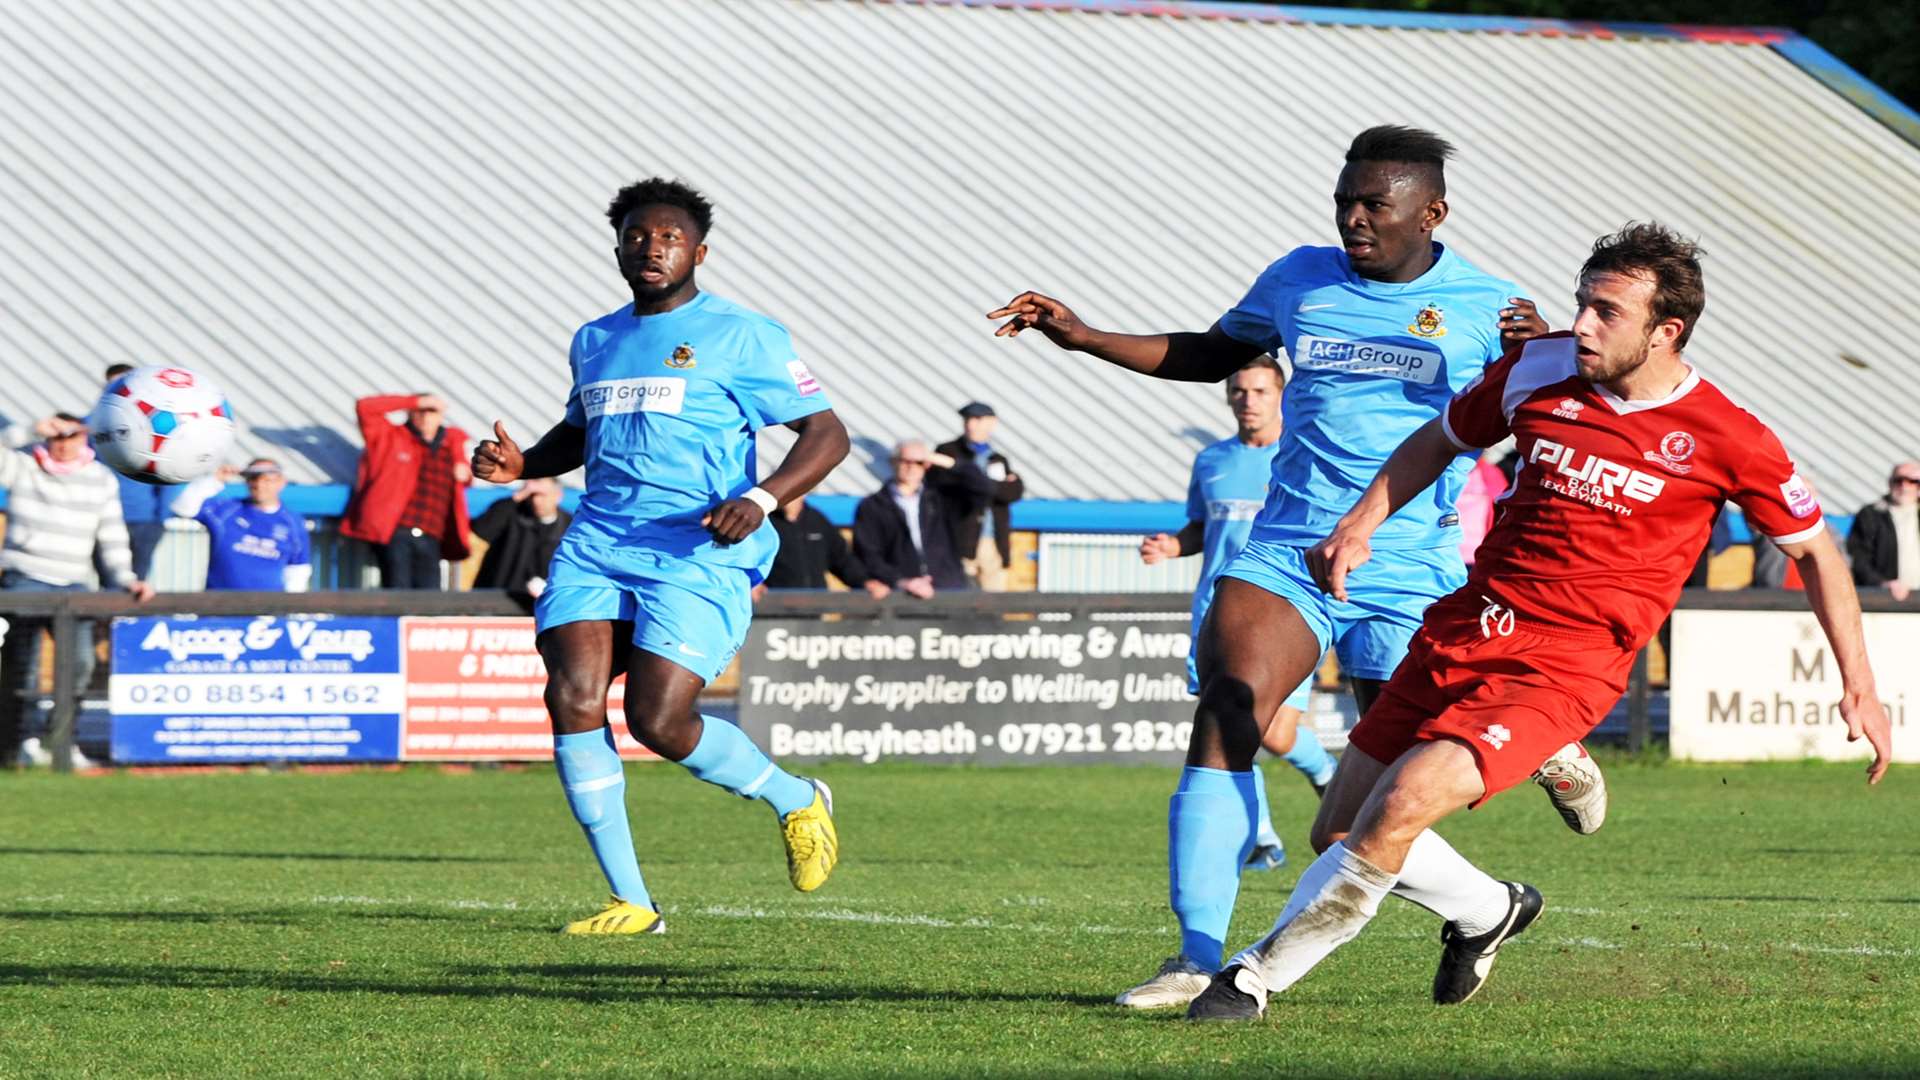 Jake Gallagher scores Welling's third goal against Southport. Picture: David Brown